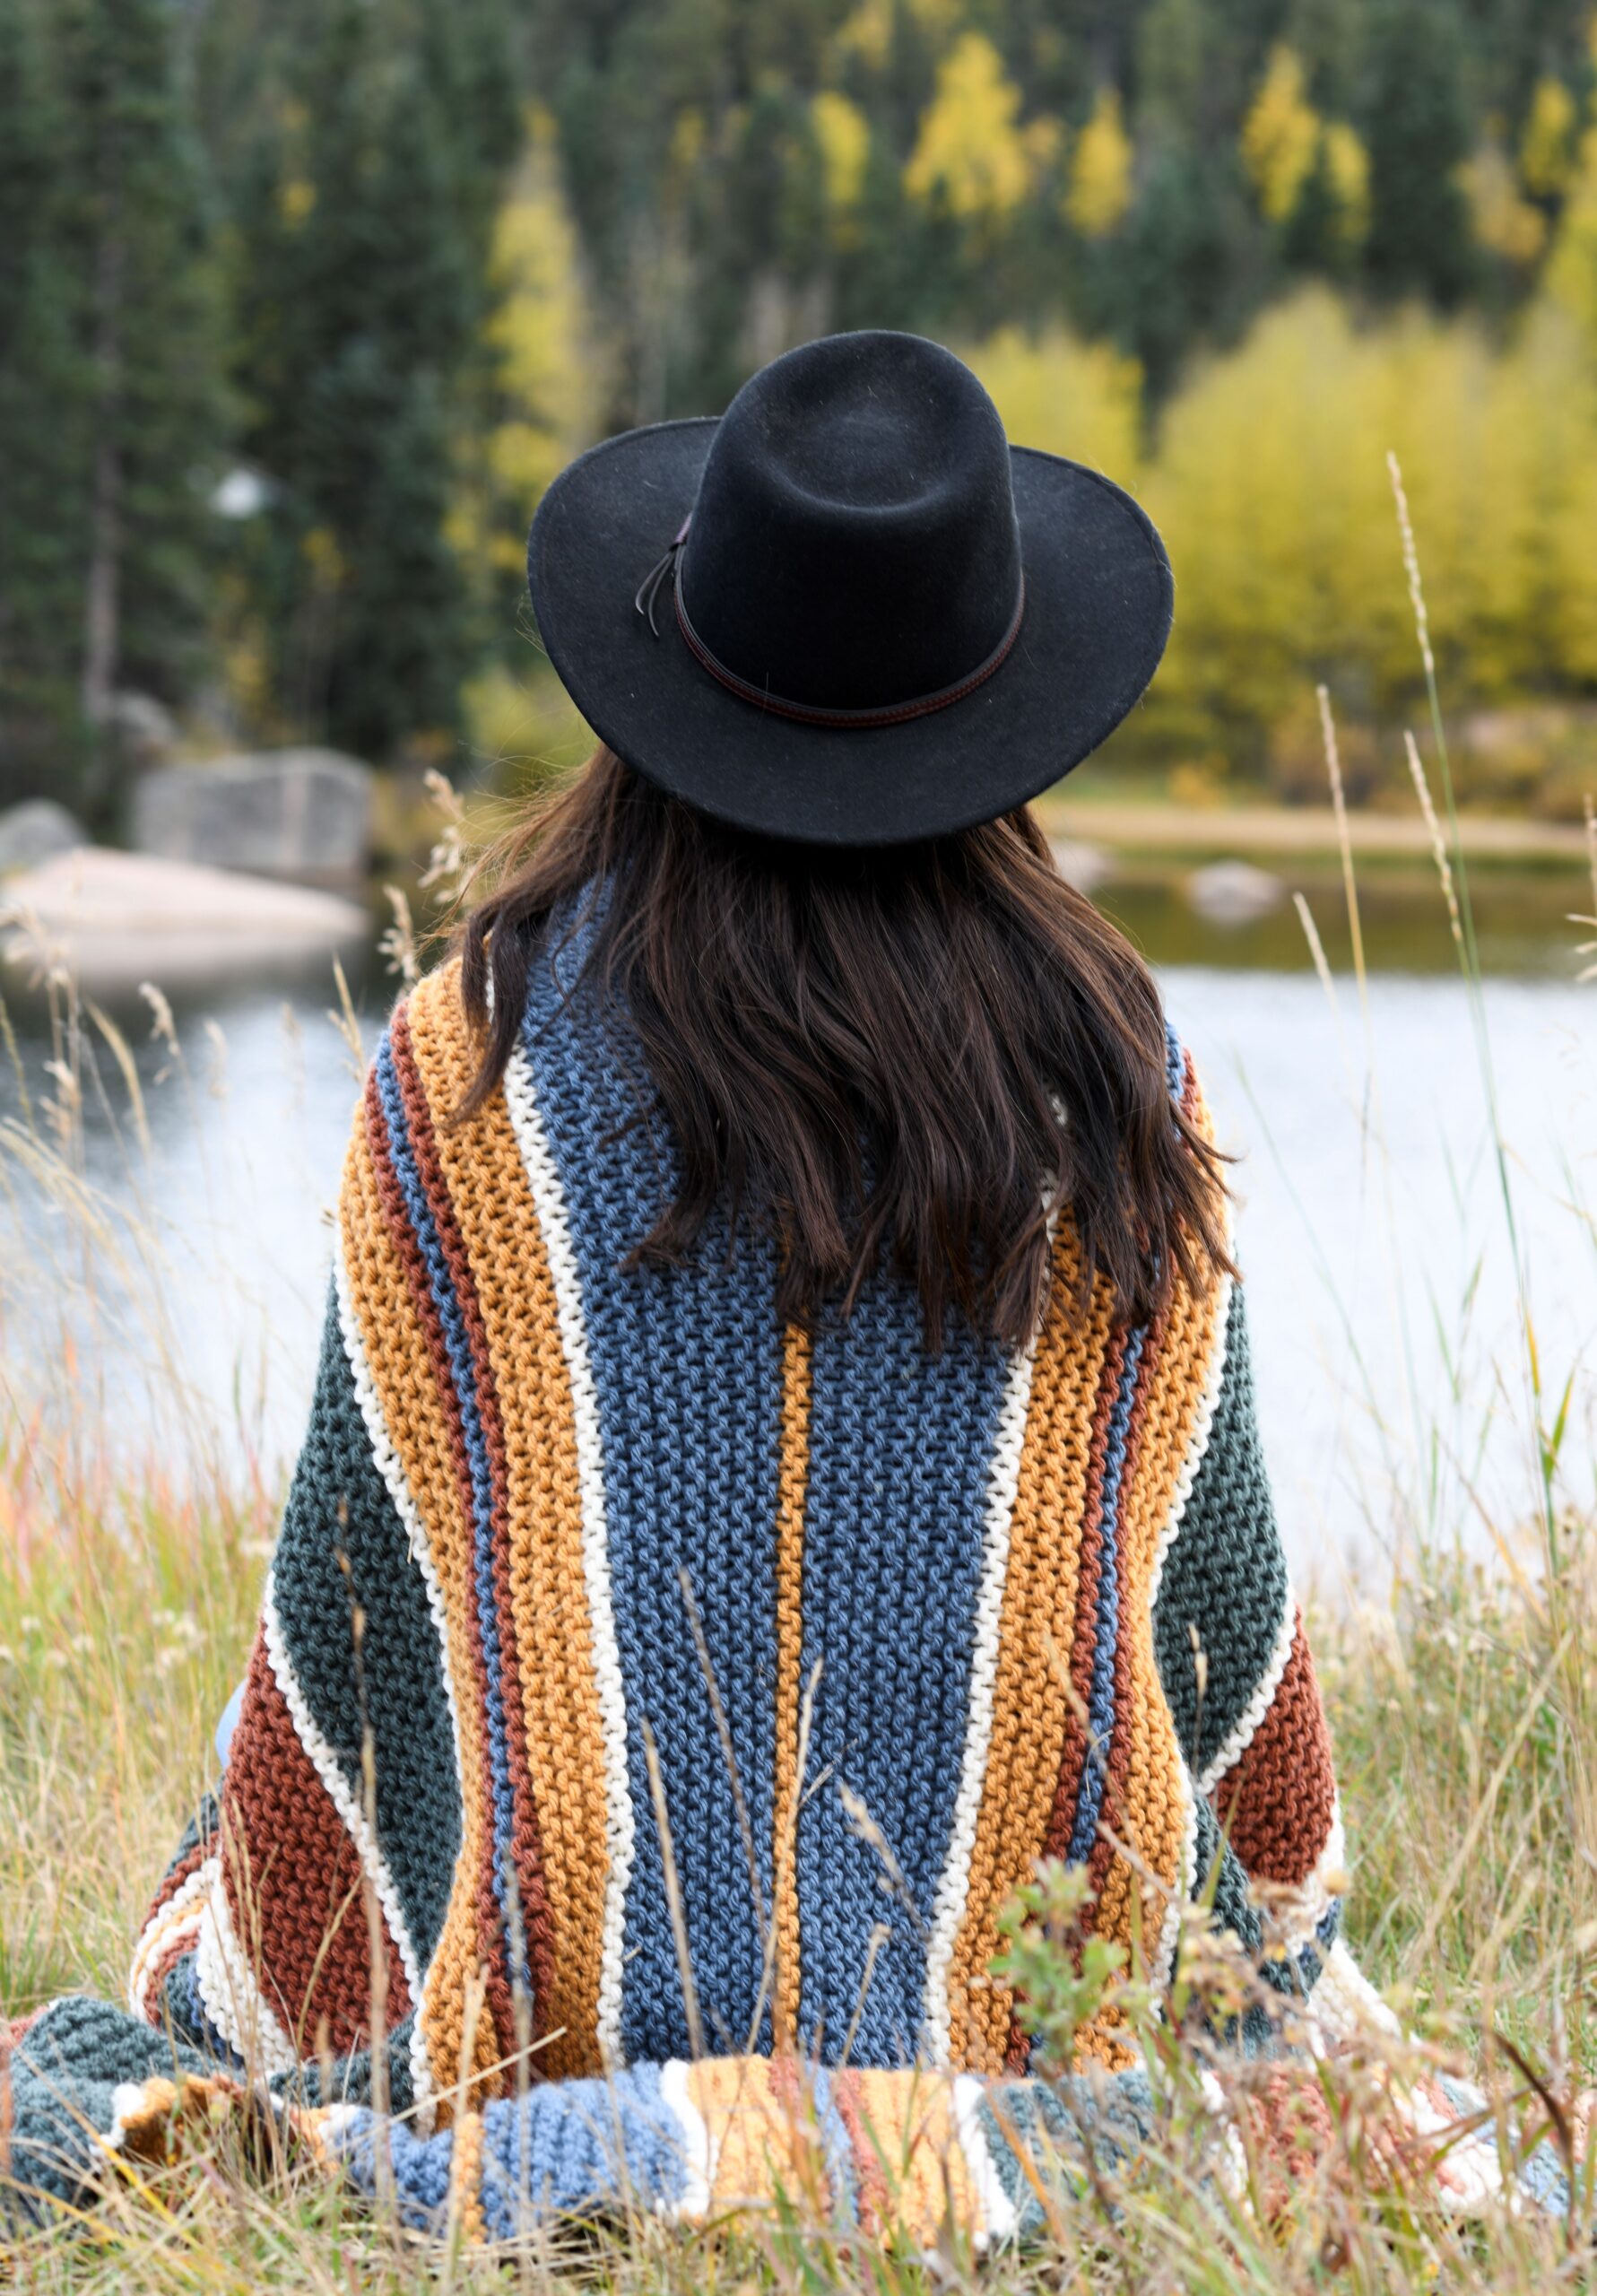 Yellowstone Easy Striped Knit Blanket Pattern – Mama In A Stitch